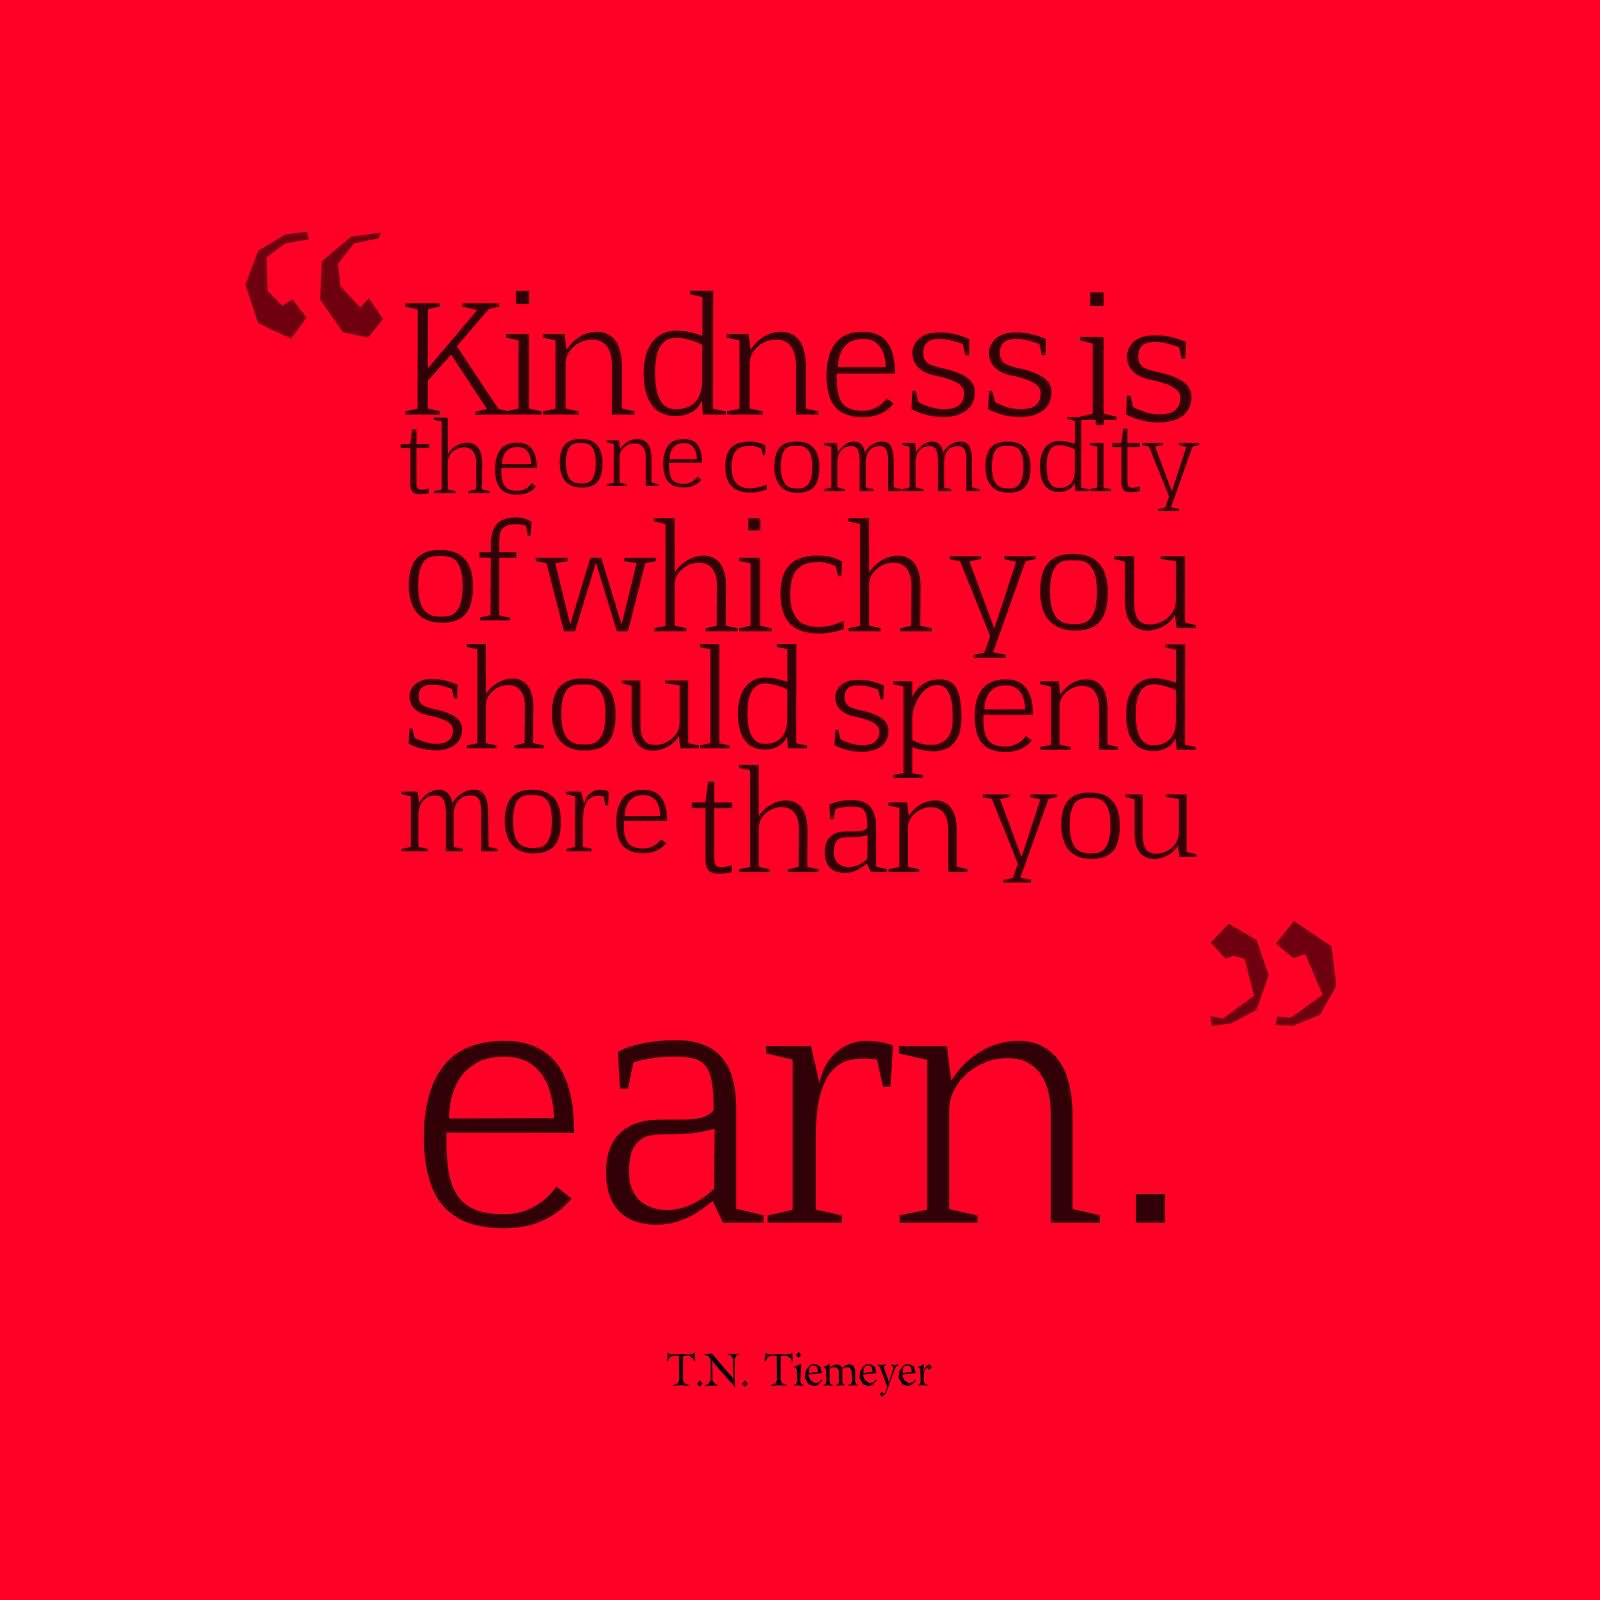 Kindness is the one commodity of which you should spend more than you earn.  - T.N. Tiemeyer